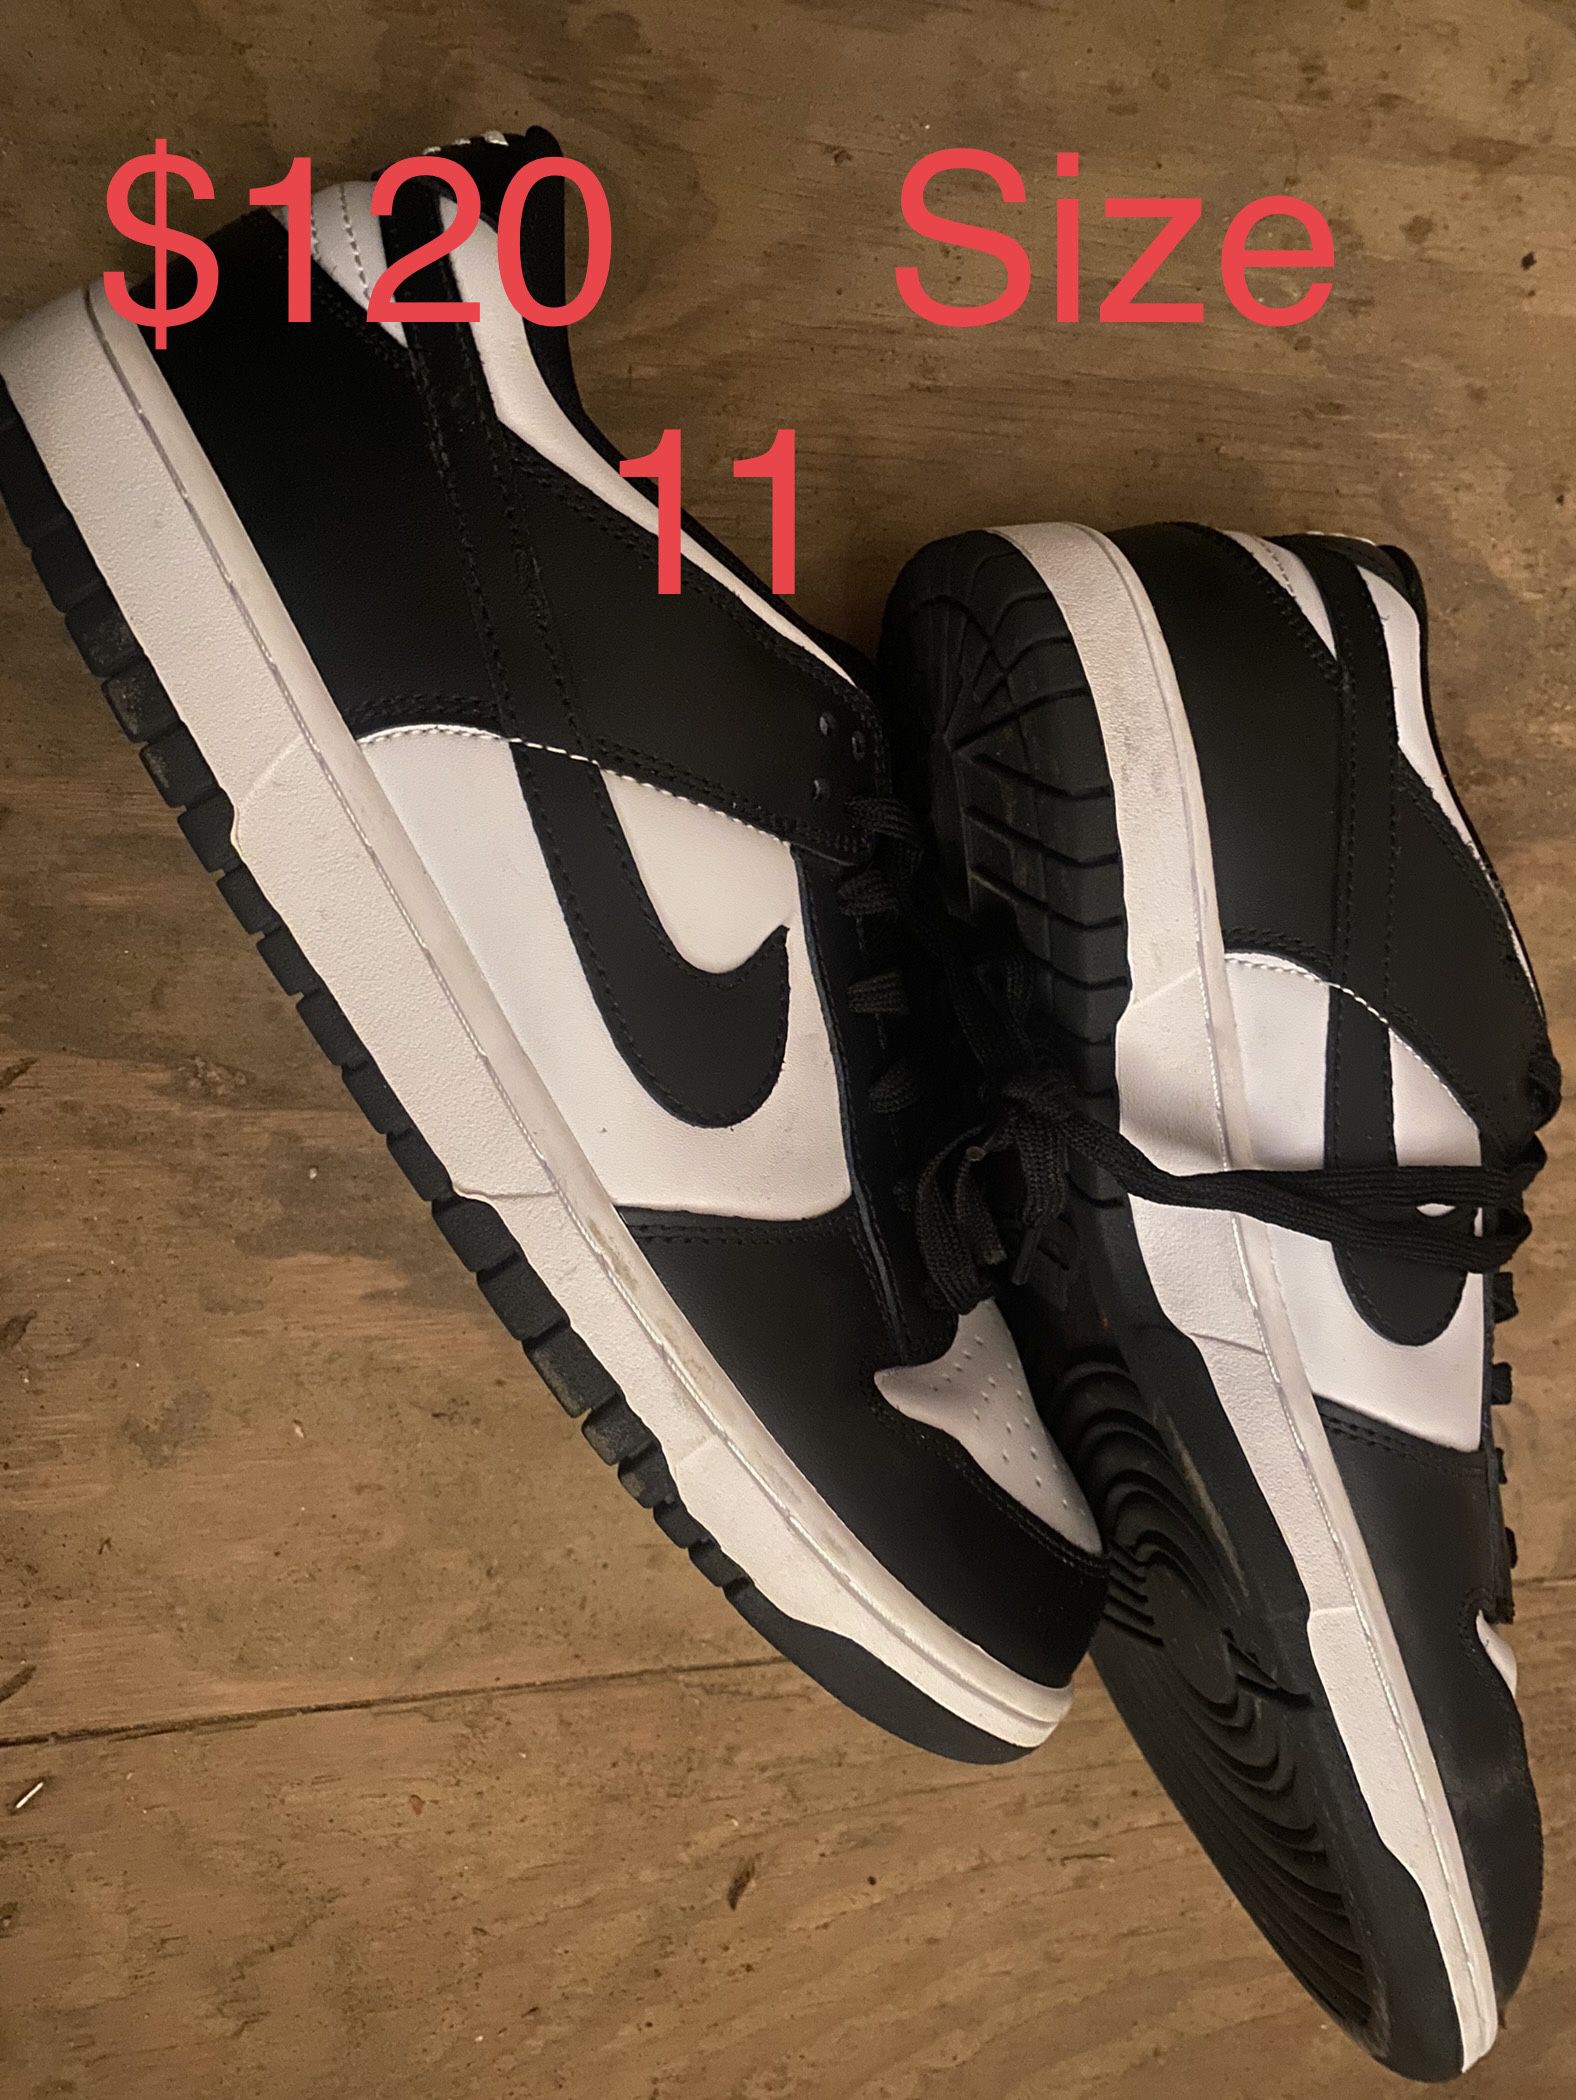 Panda Dunk Lows Size 11 Worth Over $150